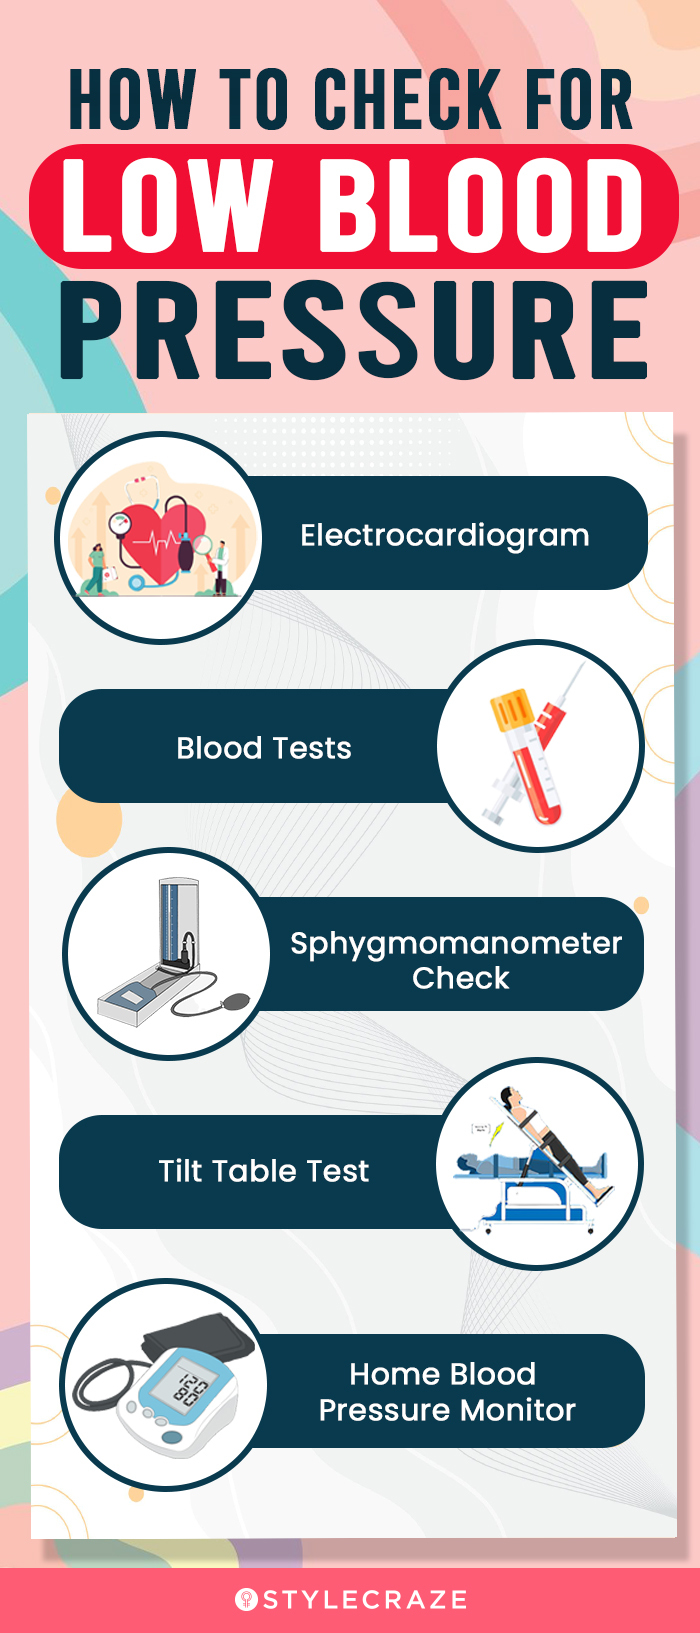 how to check for low blood pressure (infographic)